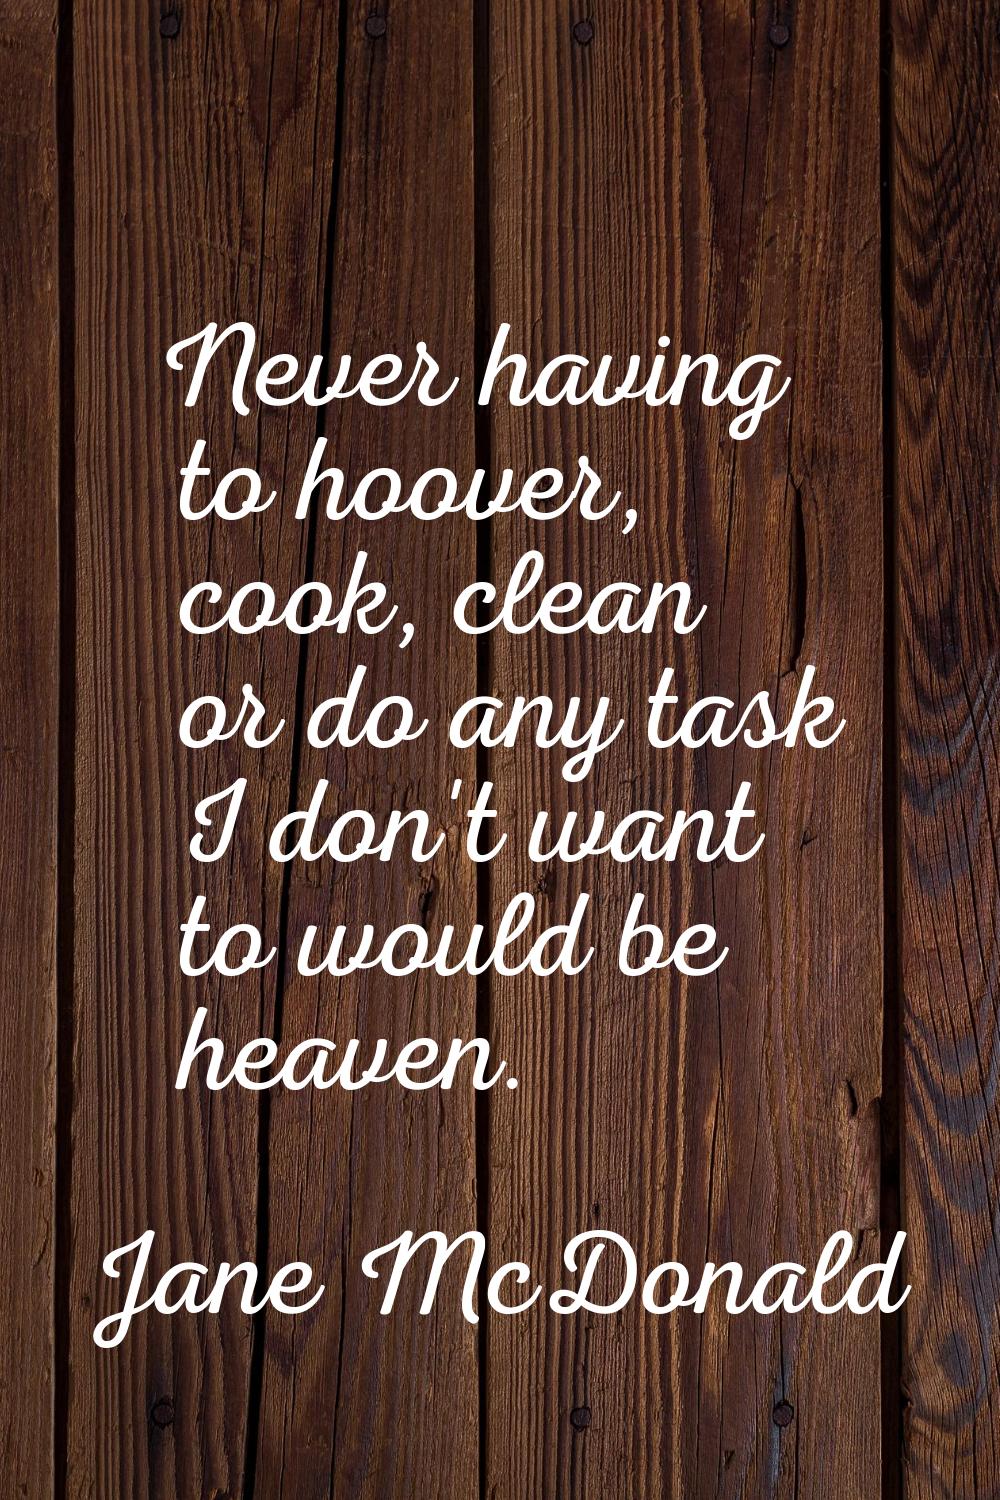 Never having to hoover, cook, clean or do any task I don't want to would be heaven.